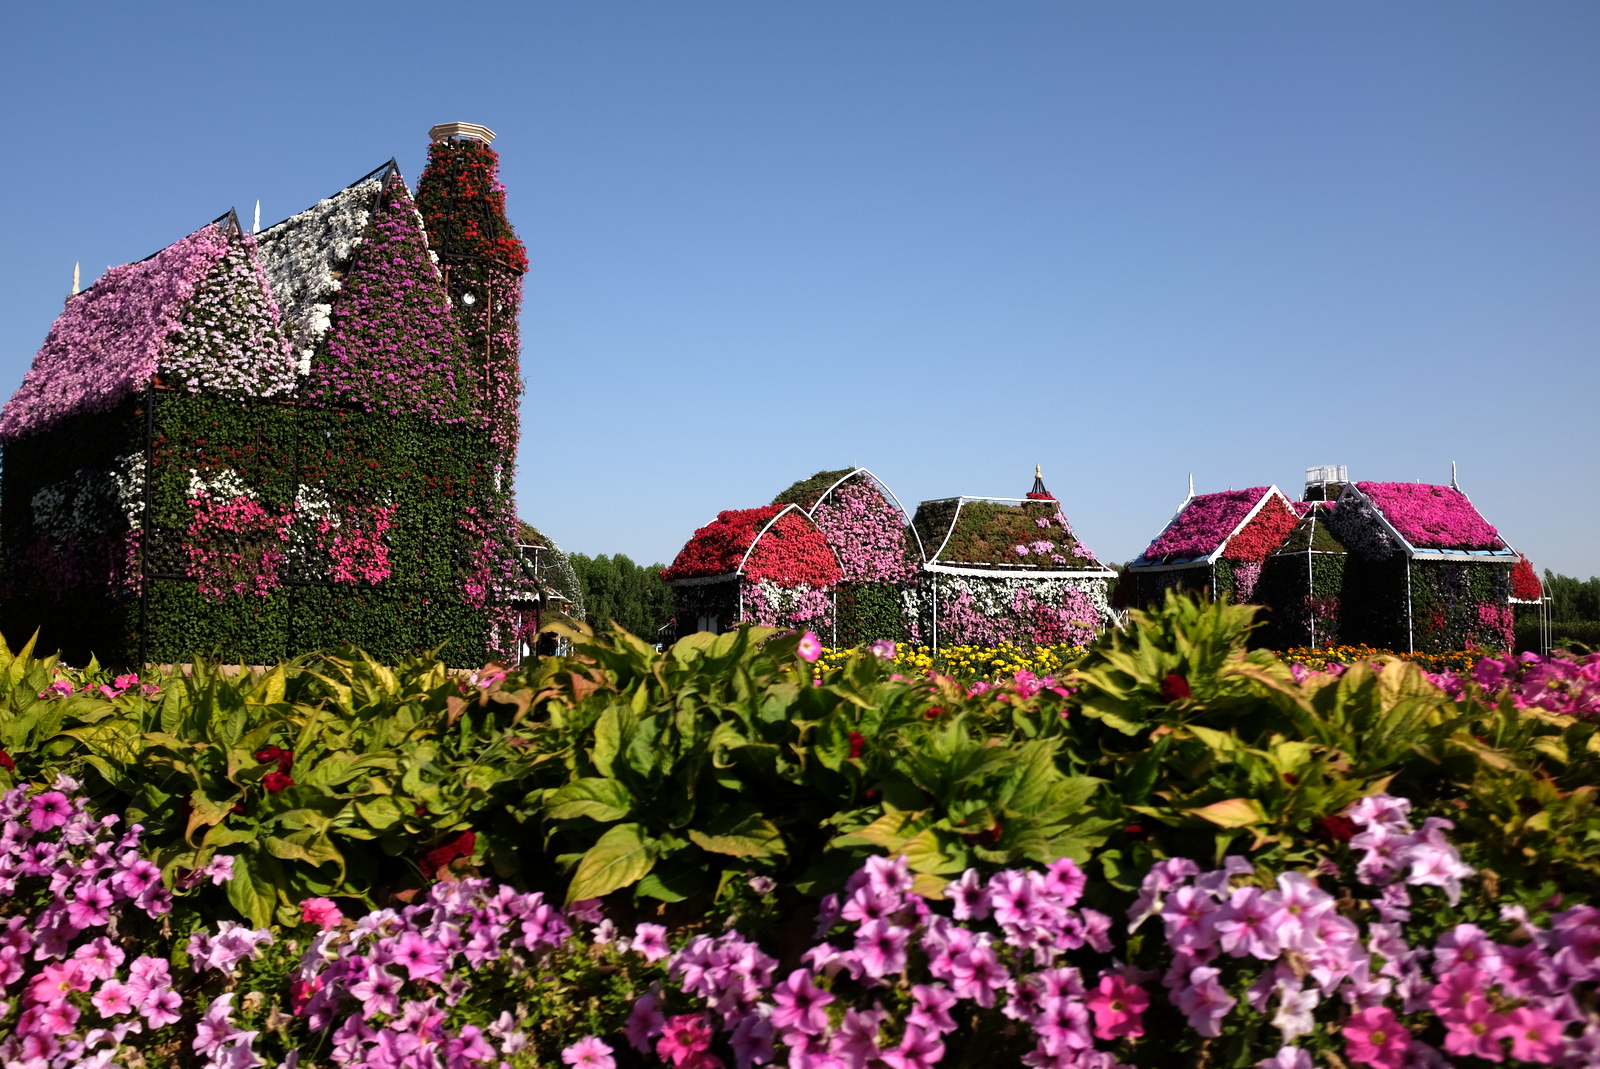 Dubai Miracle Garden - Flowers and houses